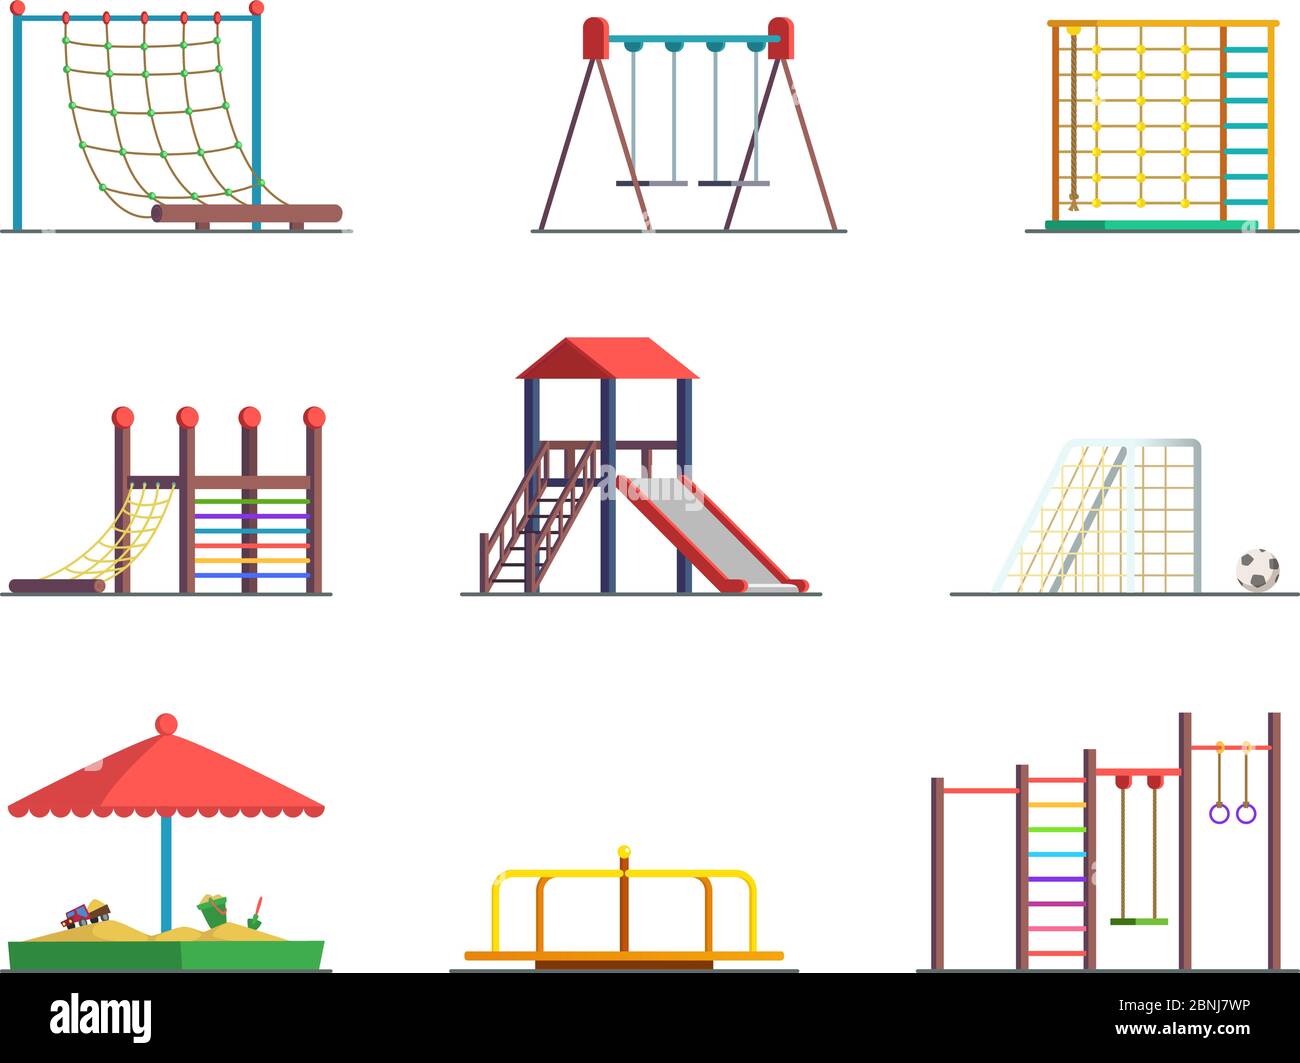 Equipment of amusement park. Playground isolated on white background Stock Vector